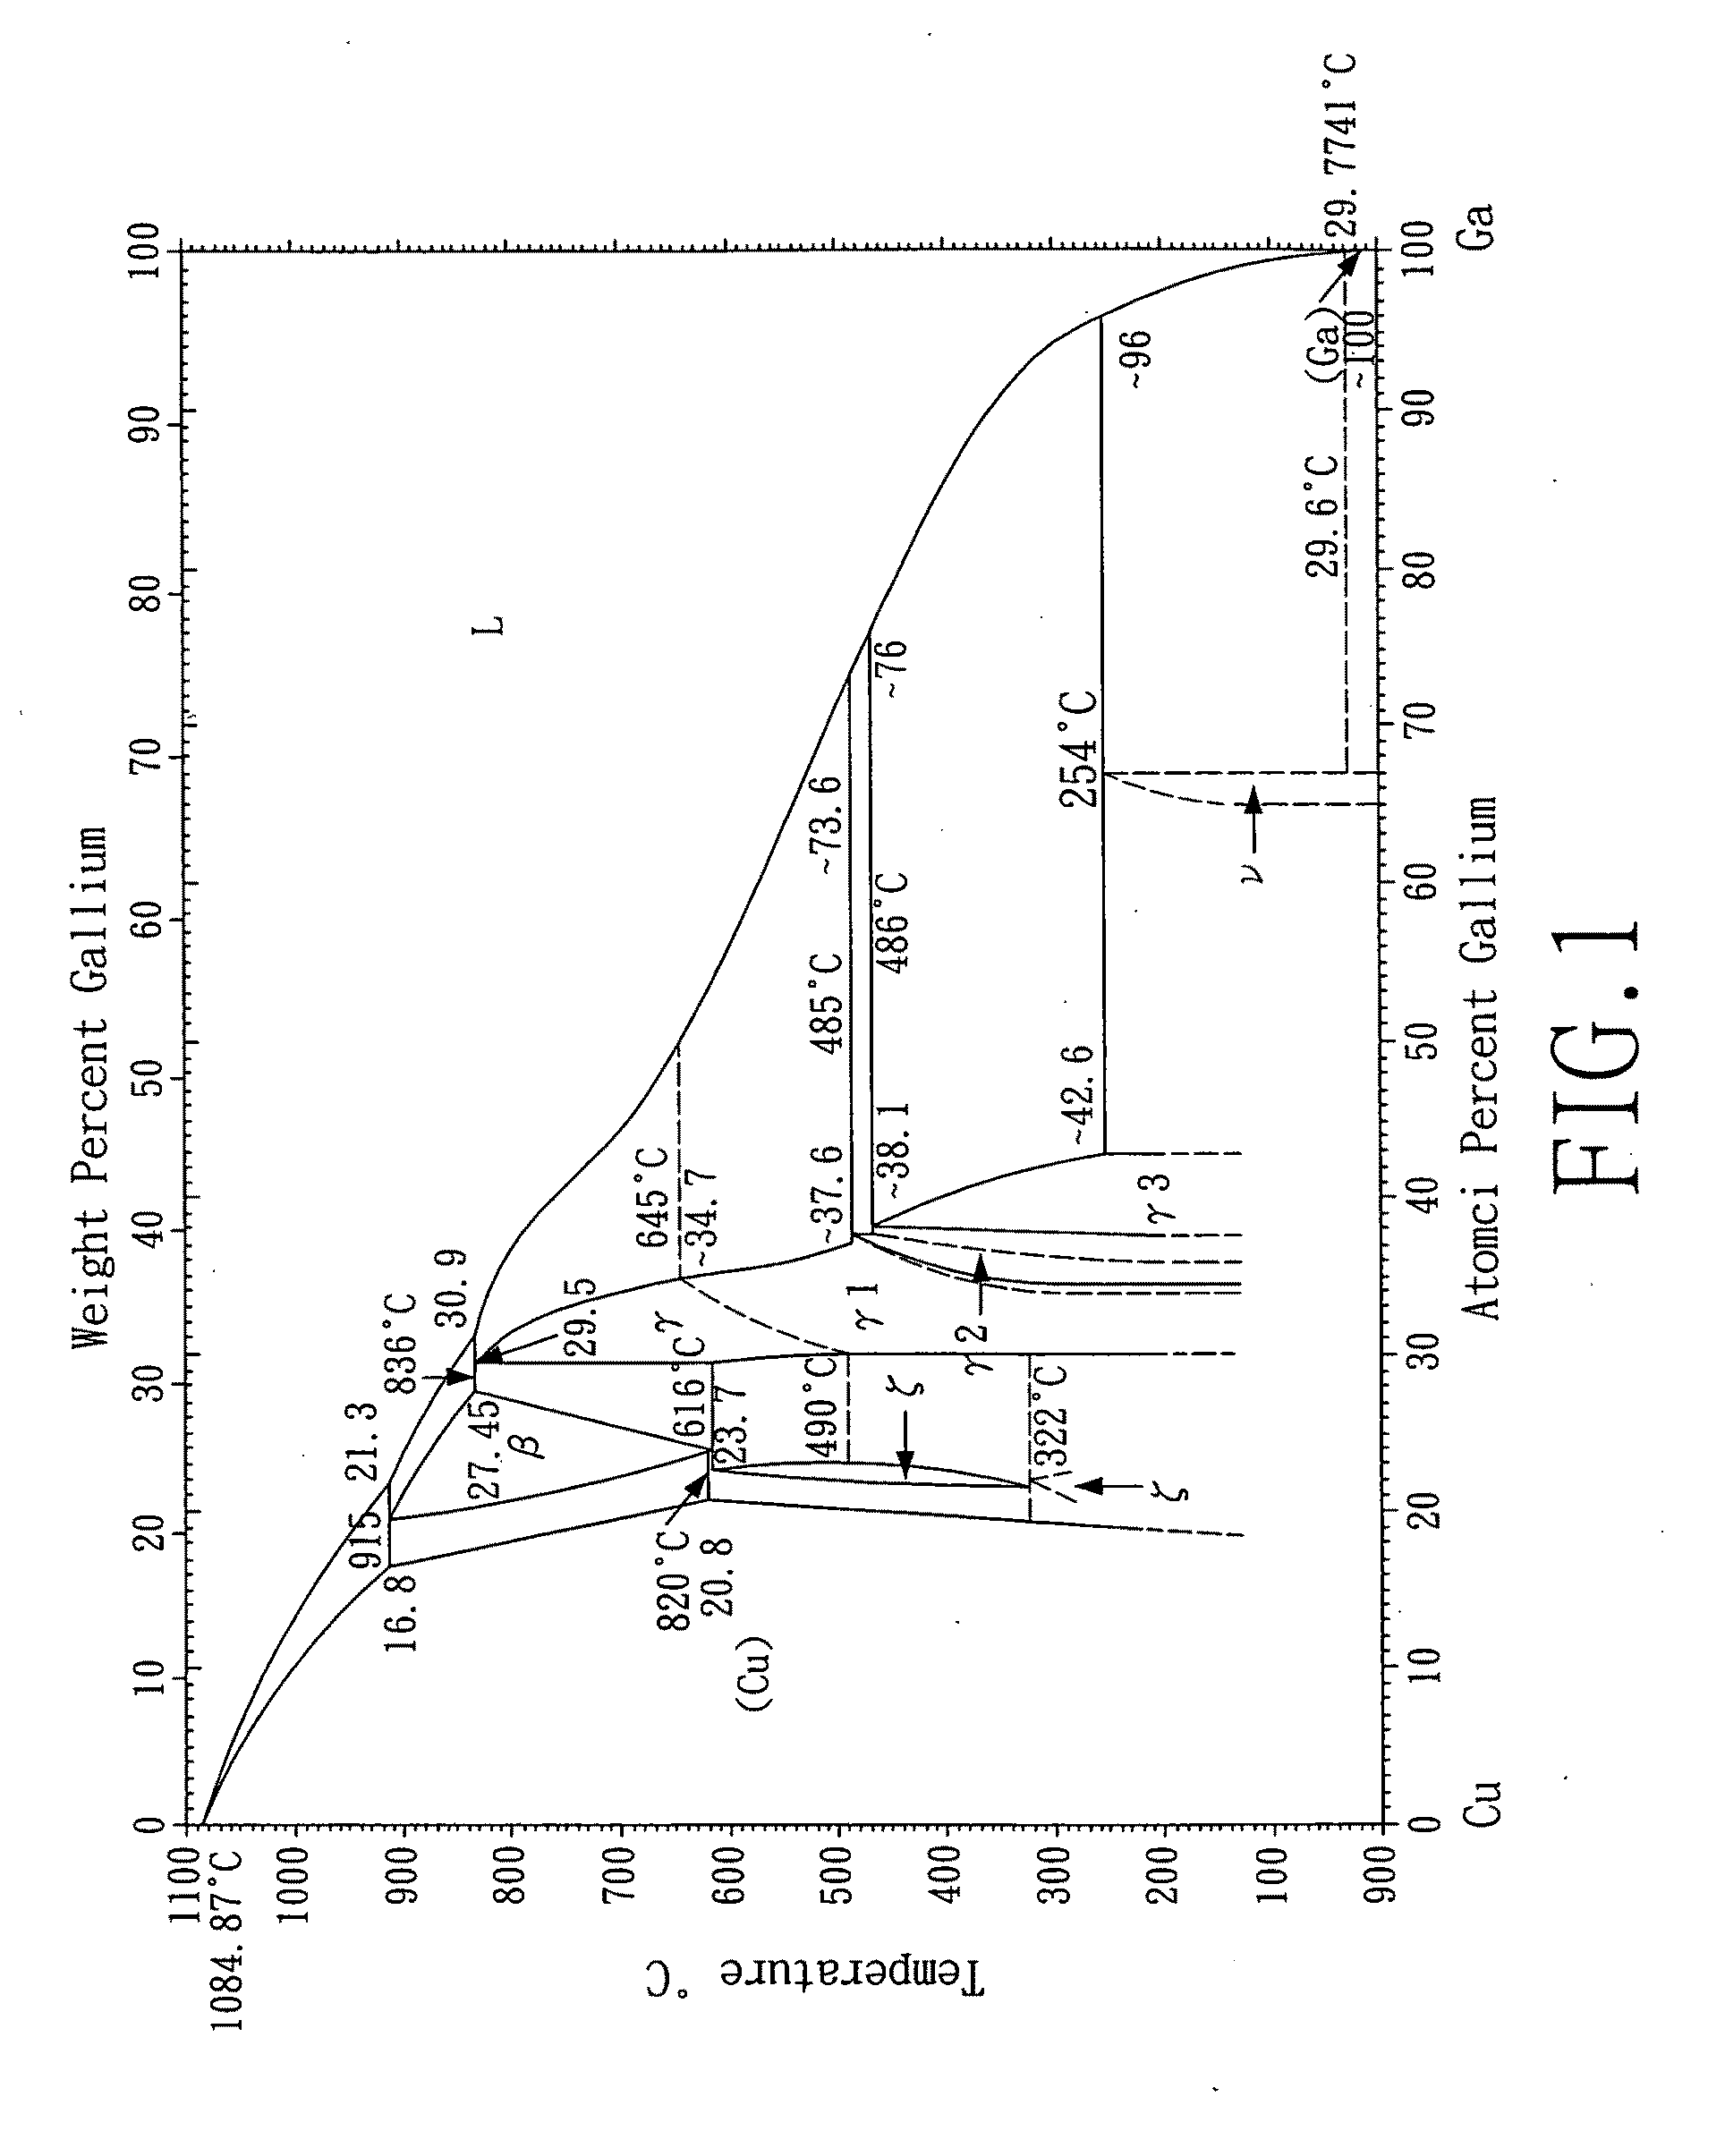 Copper-gallium allay sputtering target, method for fabricating the same and related applications